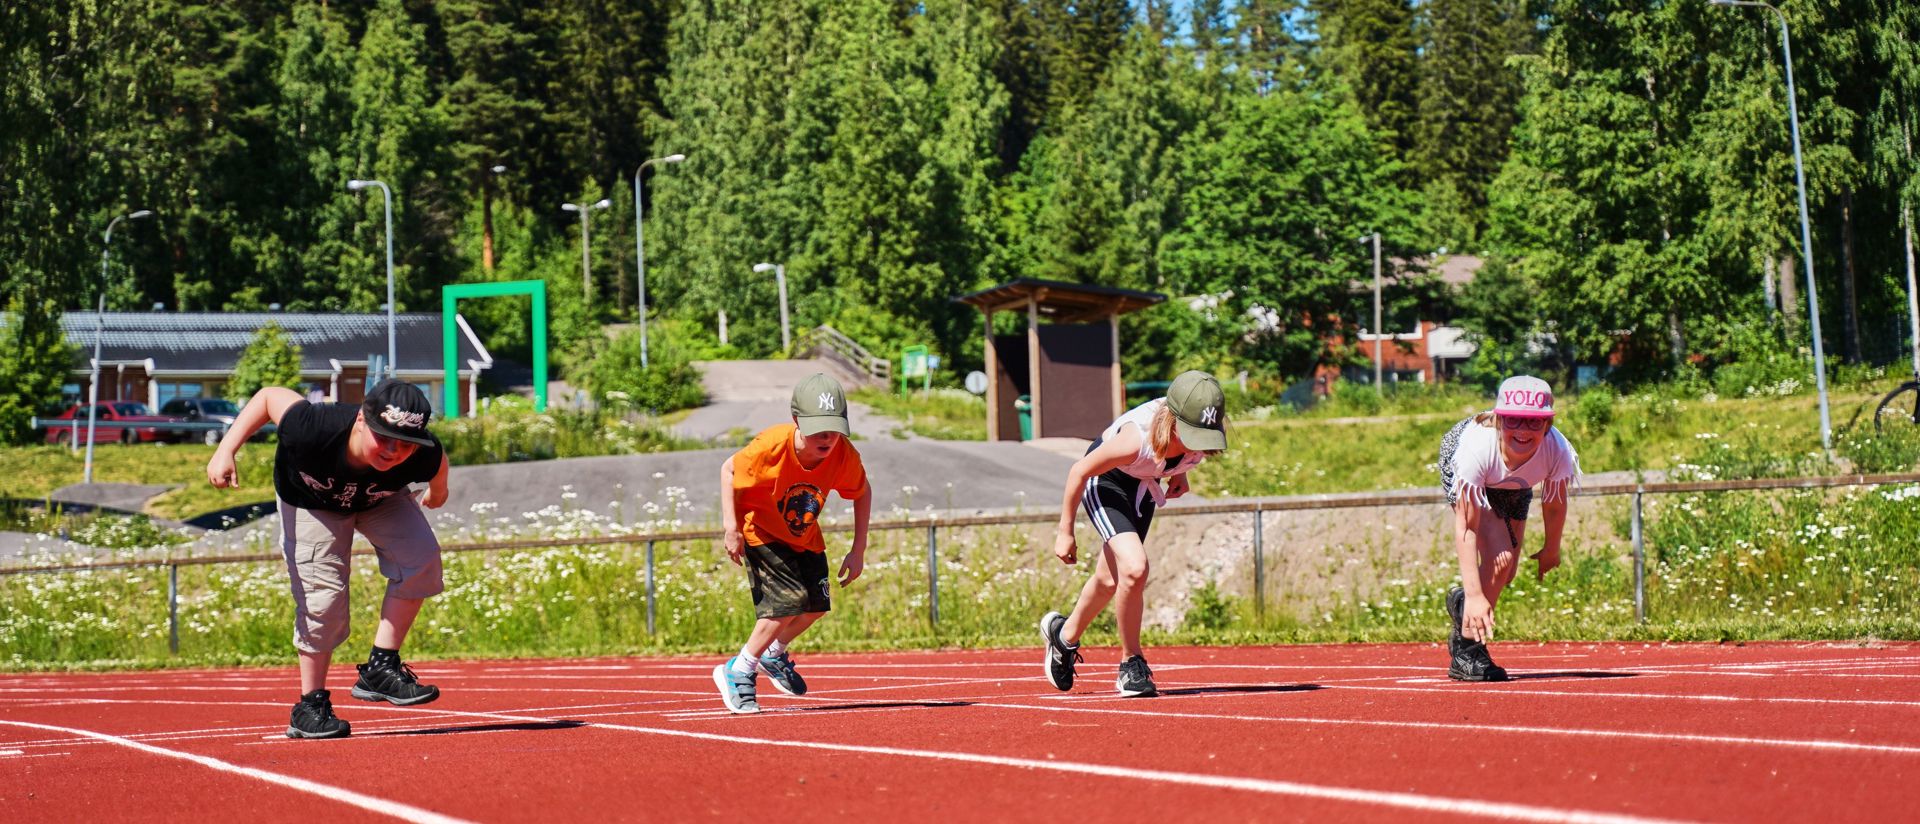 Children starting a running competition